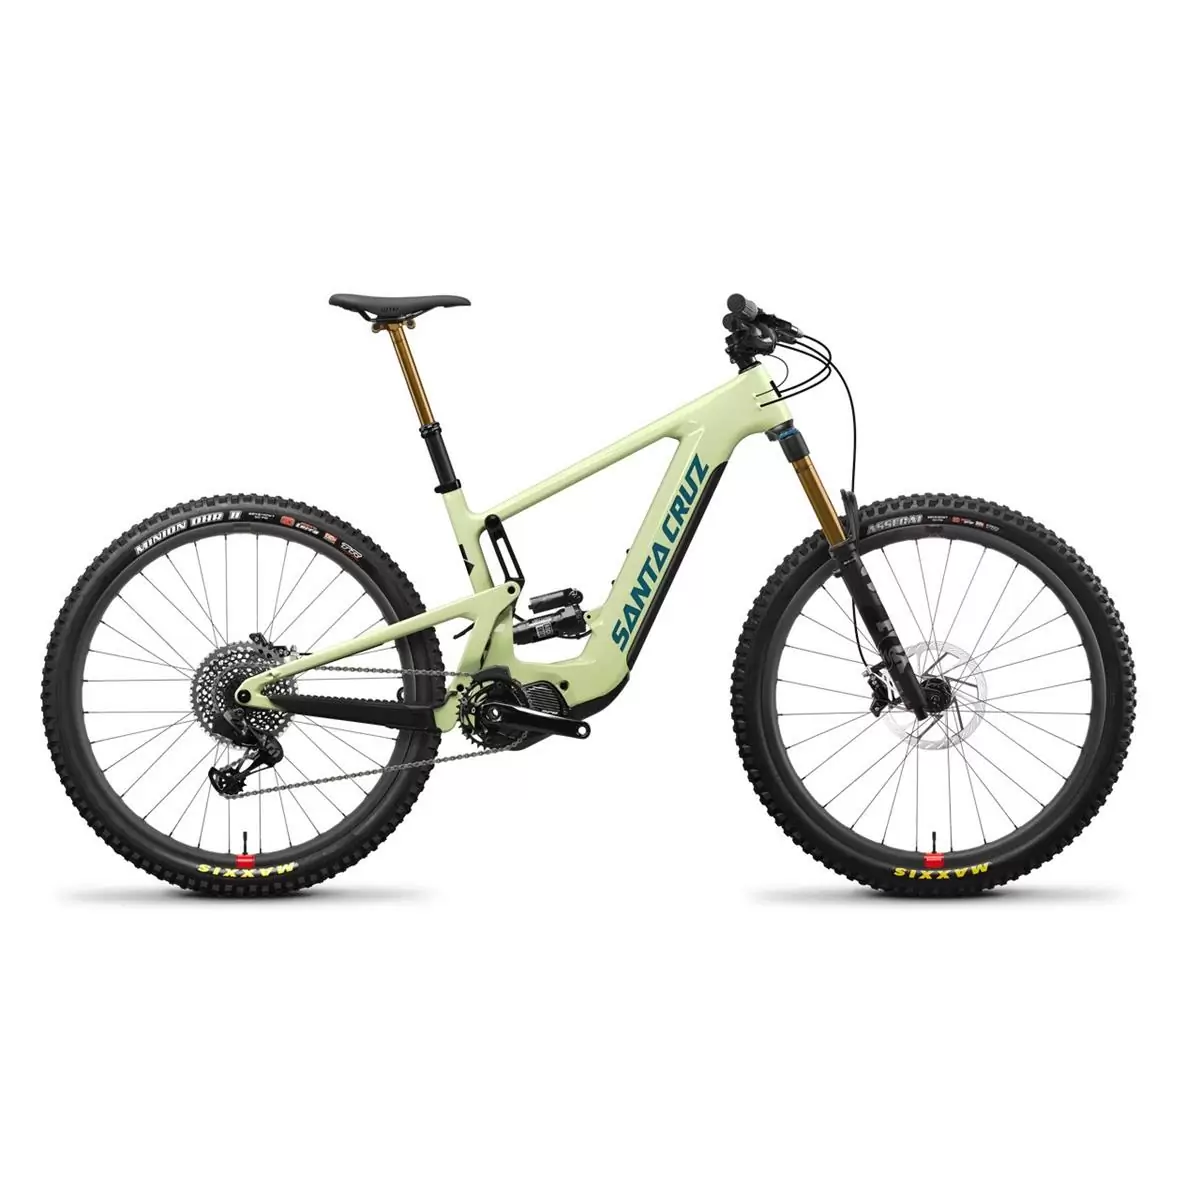 Heckler 9 CC X01 AXS RSV 29'' 160mm 12s 720Wh Shimano EP8 Avocado Green 2023 Size M - image